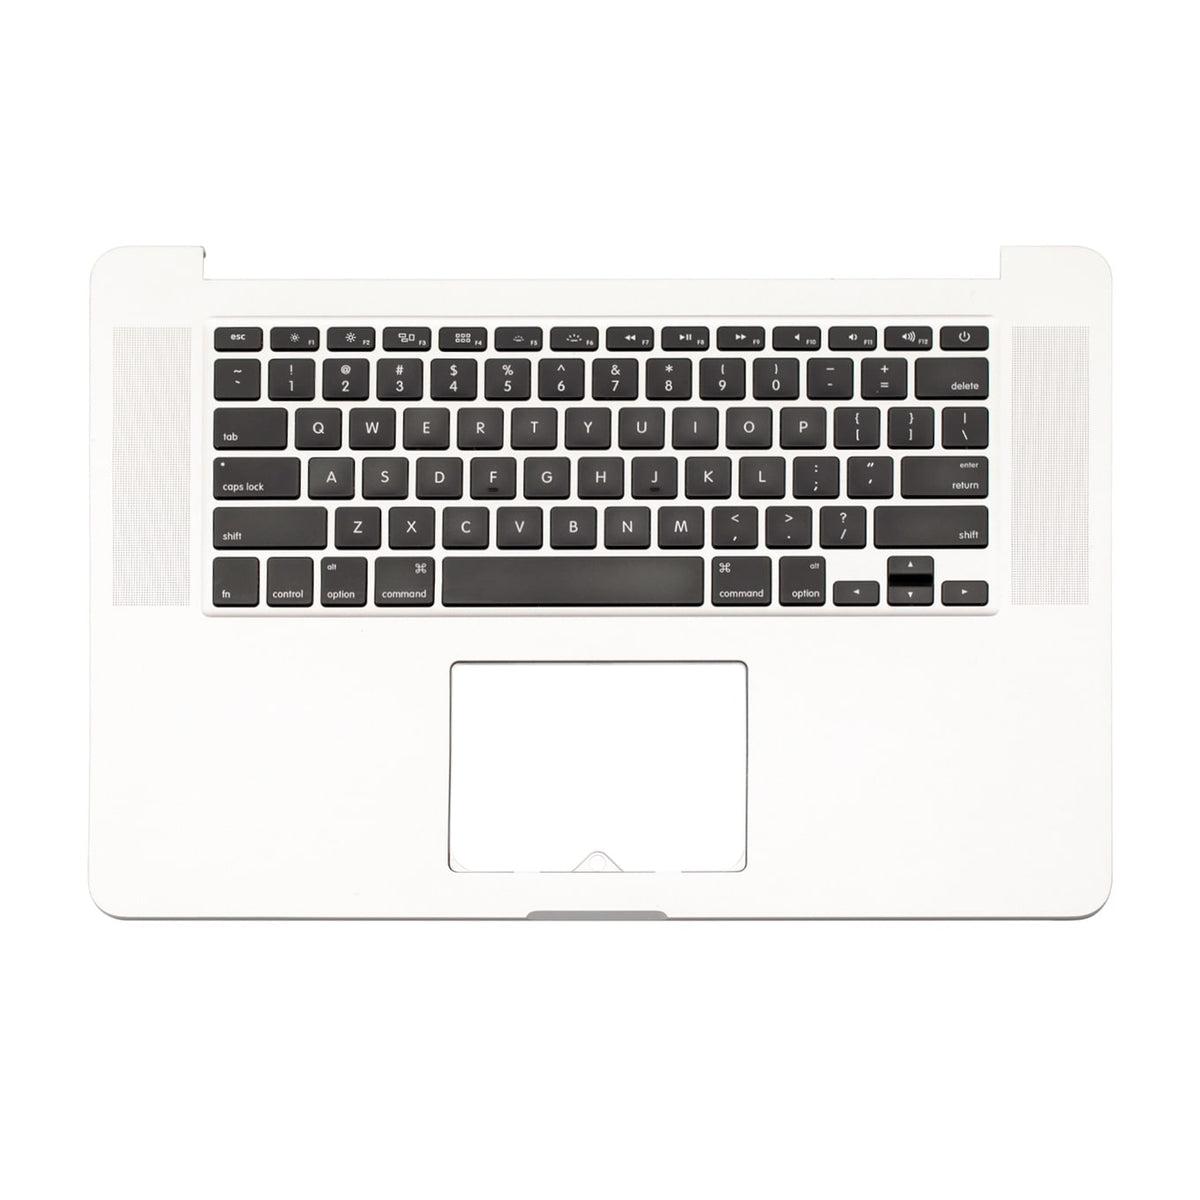 TOP CASE WITH KEYBOARD FOR MACBOOK PRO 15" RETINA A1398 (LATE 2013,MID 2014)